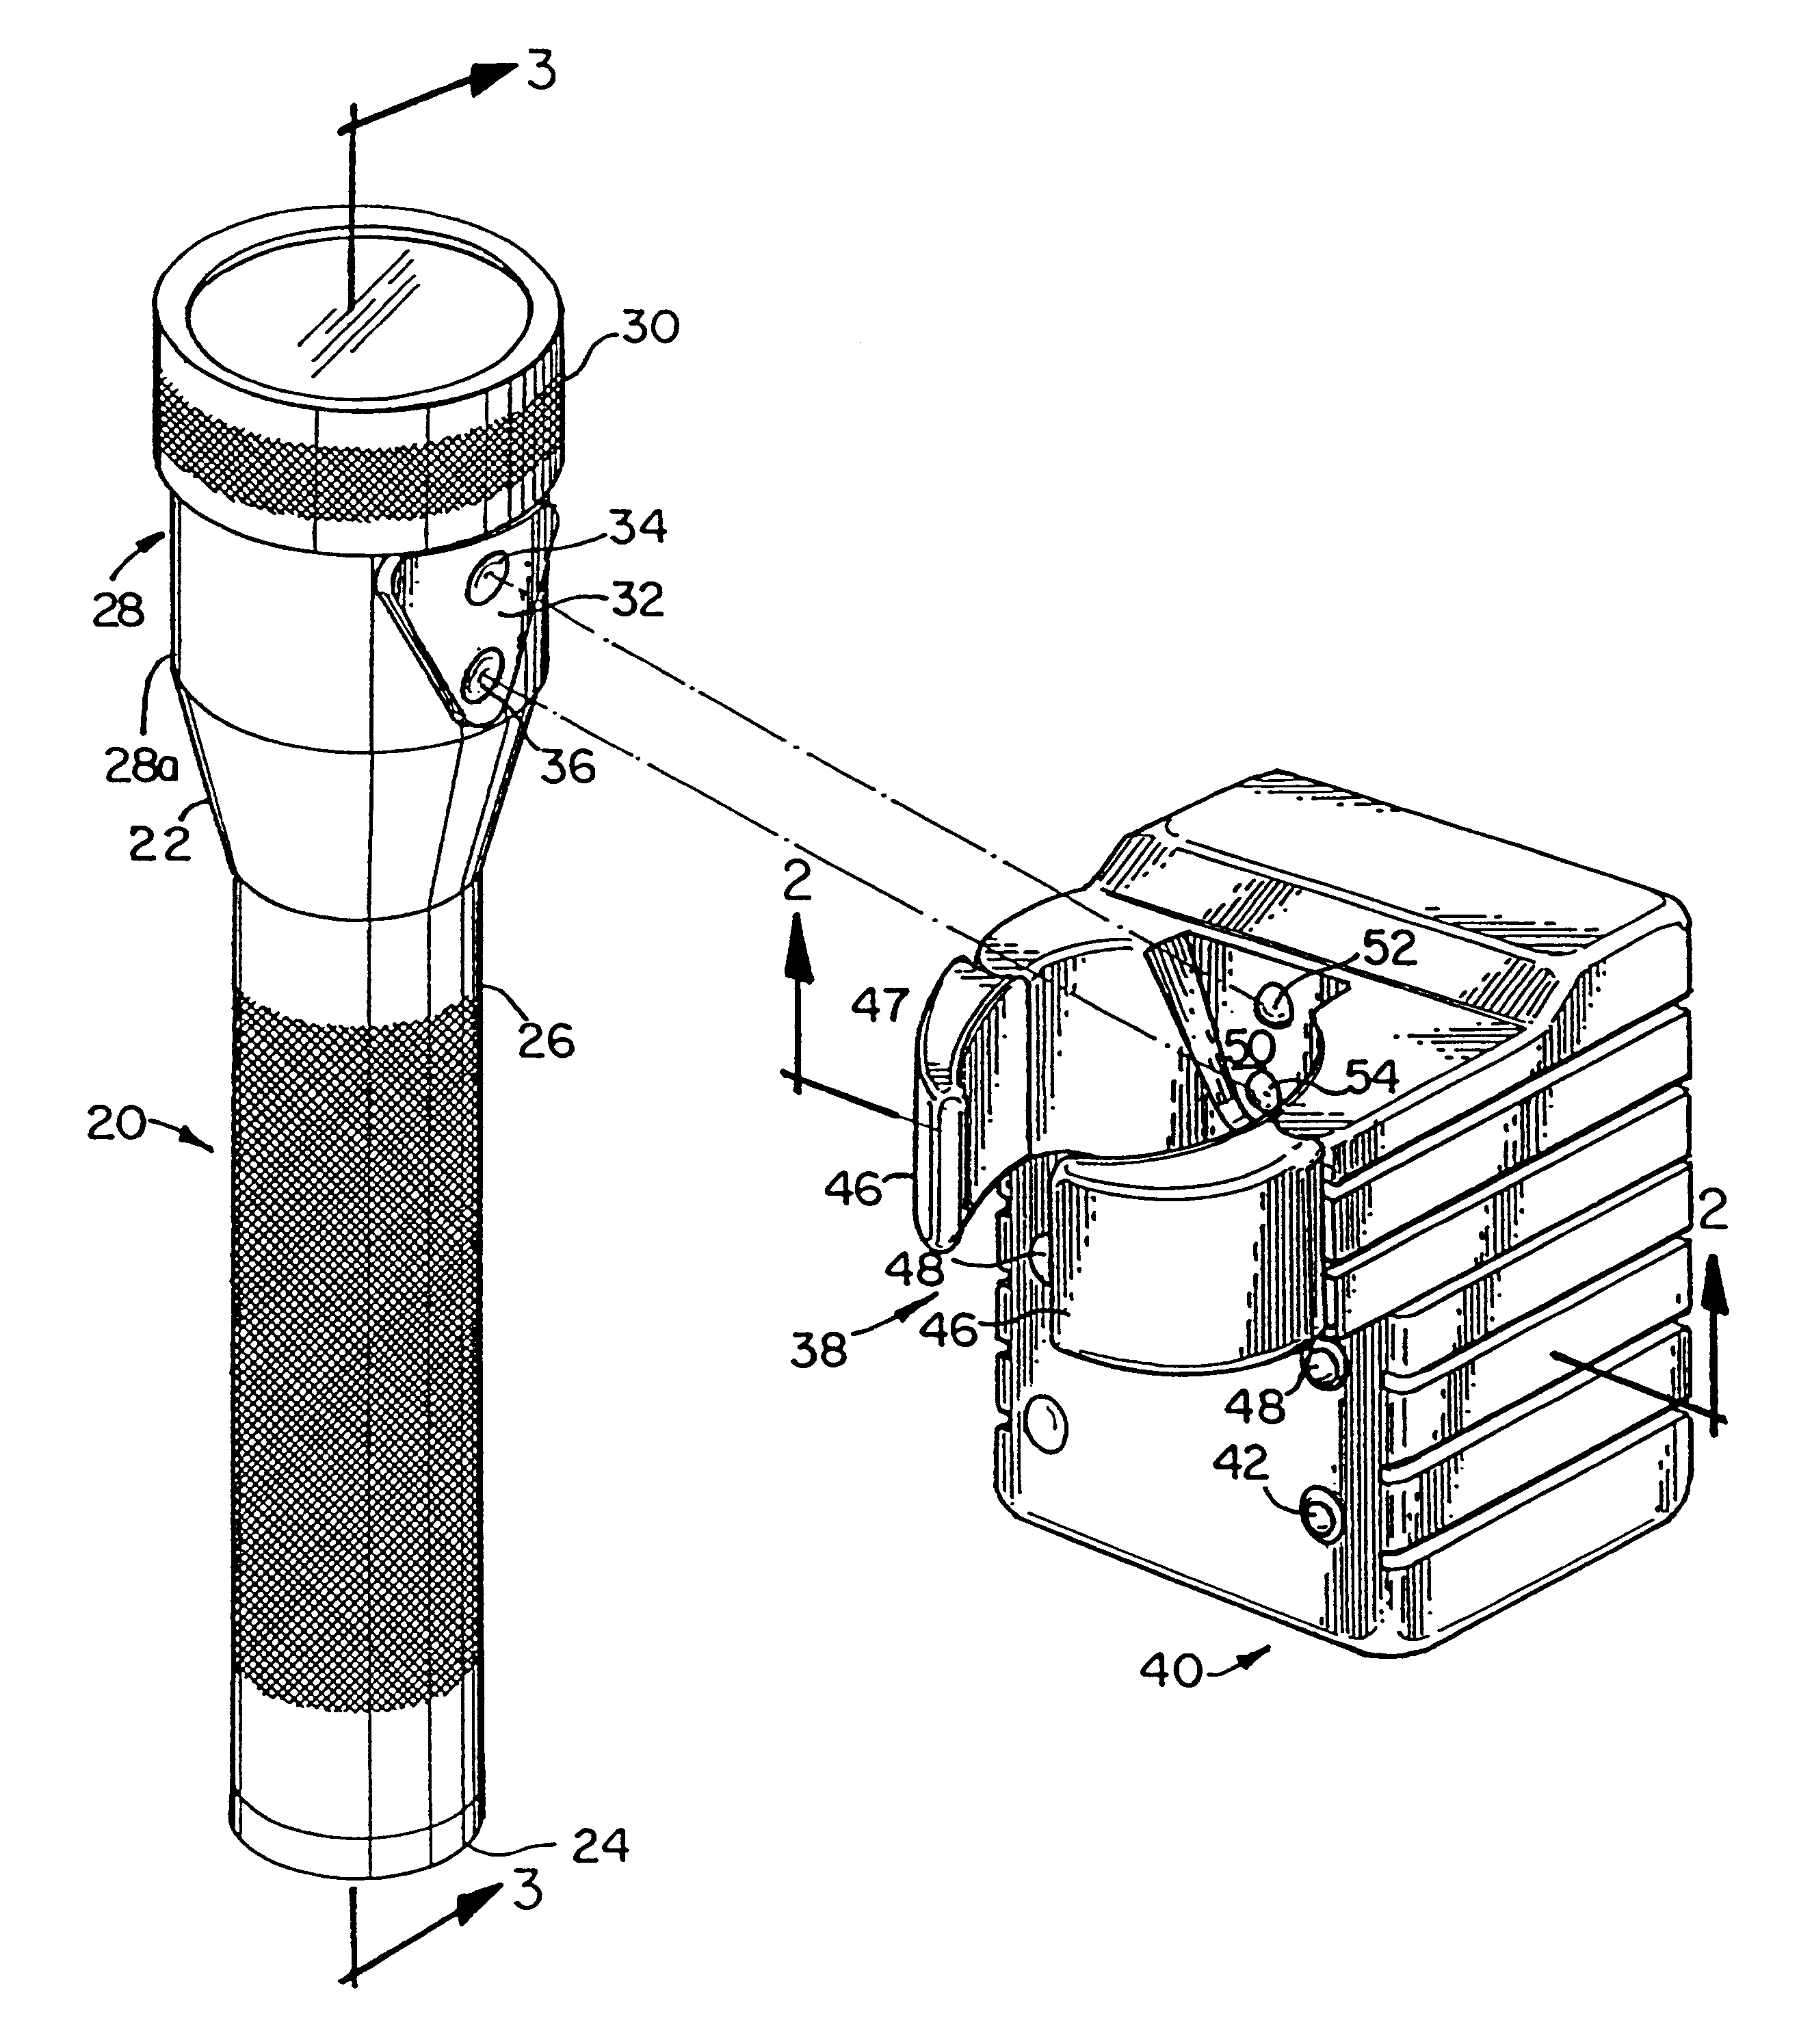 Flashlight and recharging system therefor